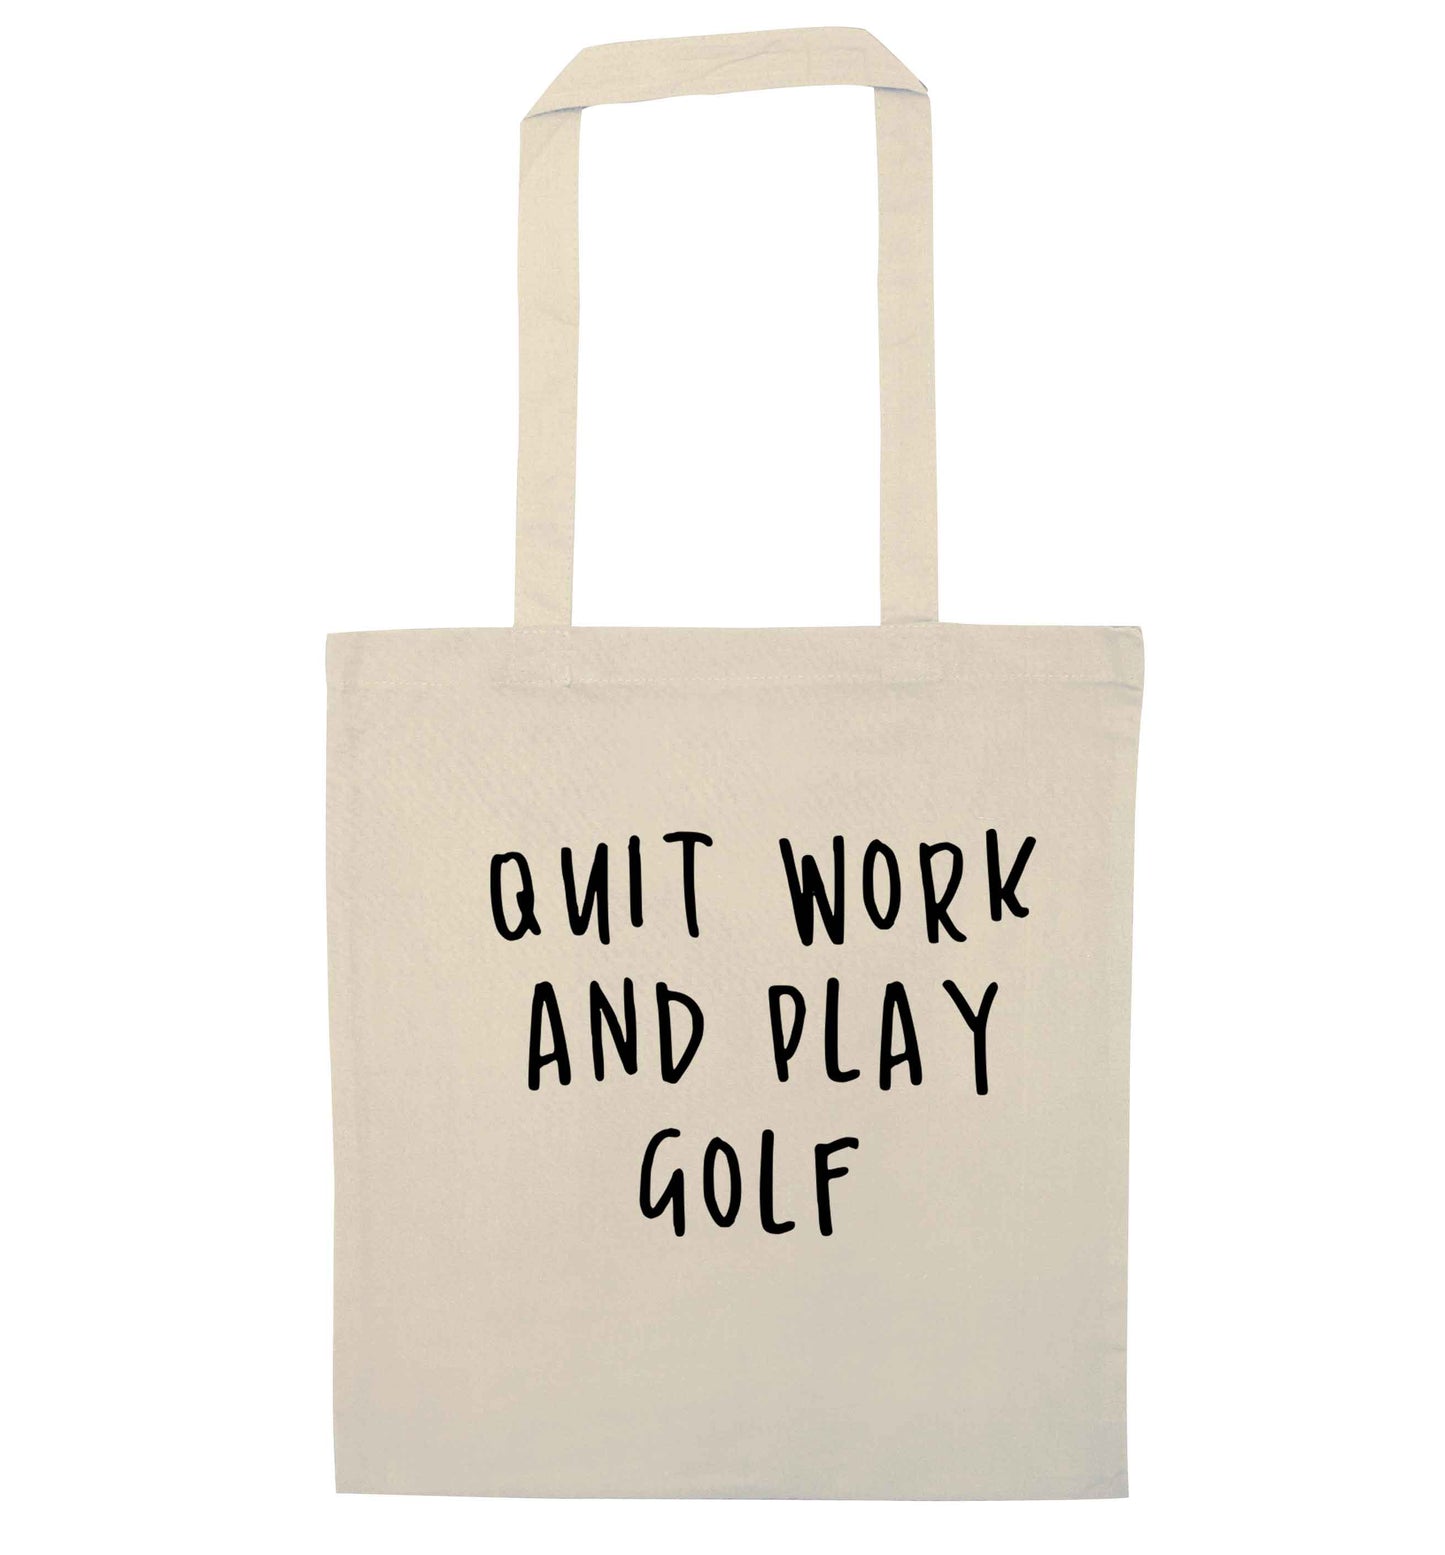 Quit work and play golf natural tote bag